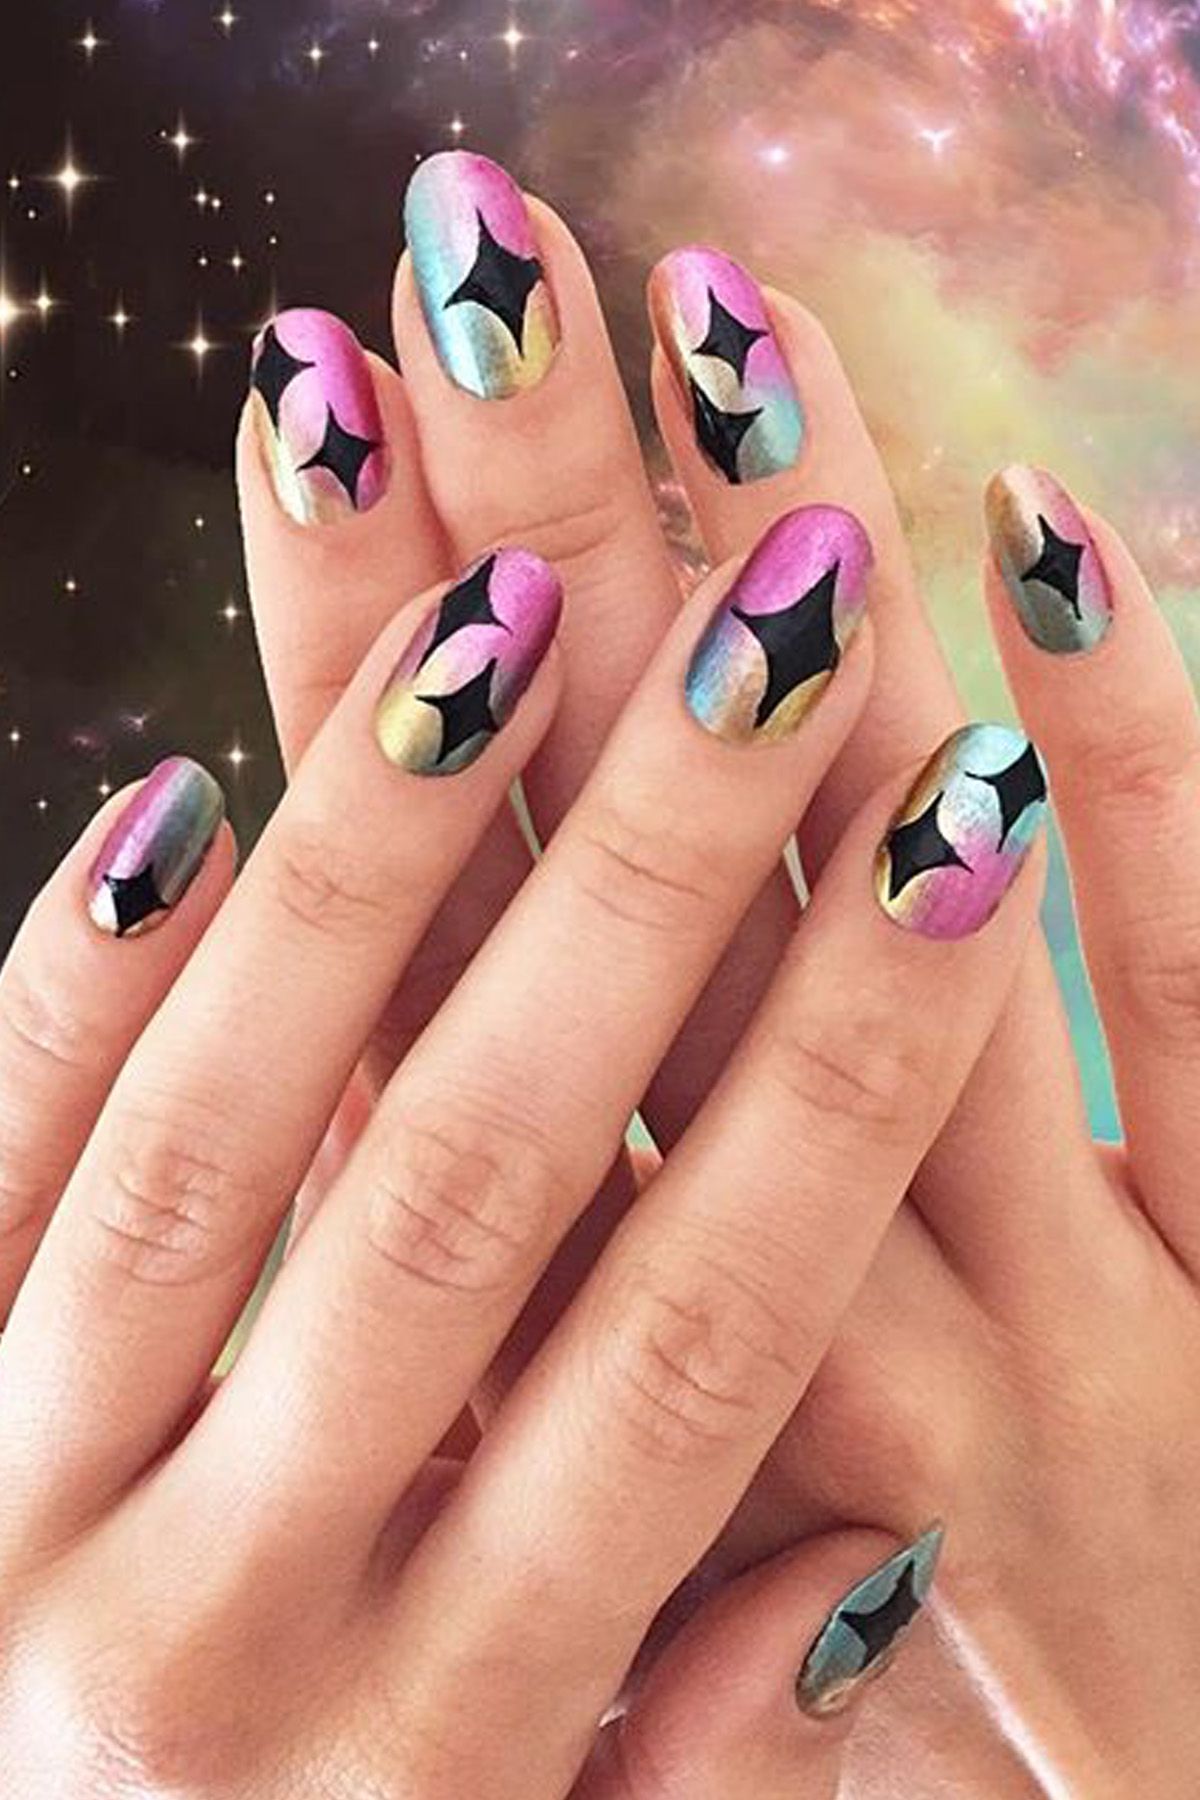 397,987 Nail Design Images, Stock Photos, 3D objects, & Vectors |  Shutterstock